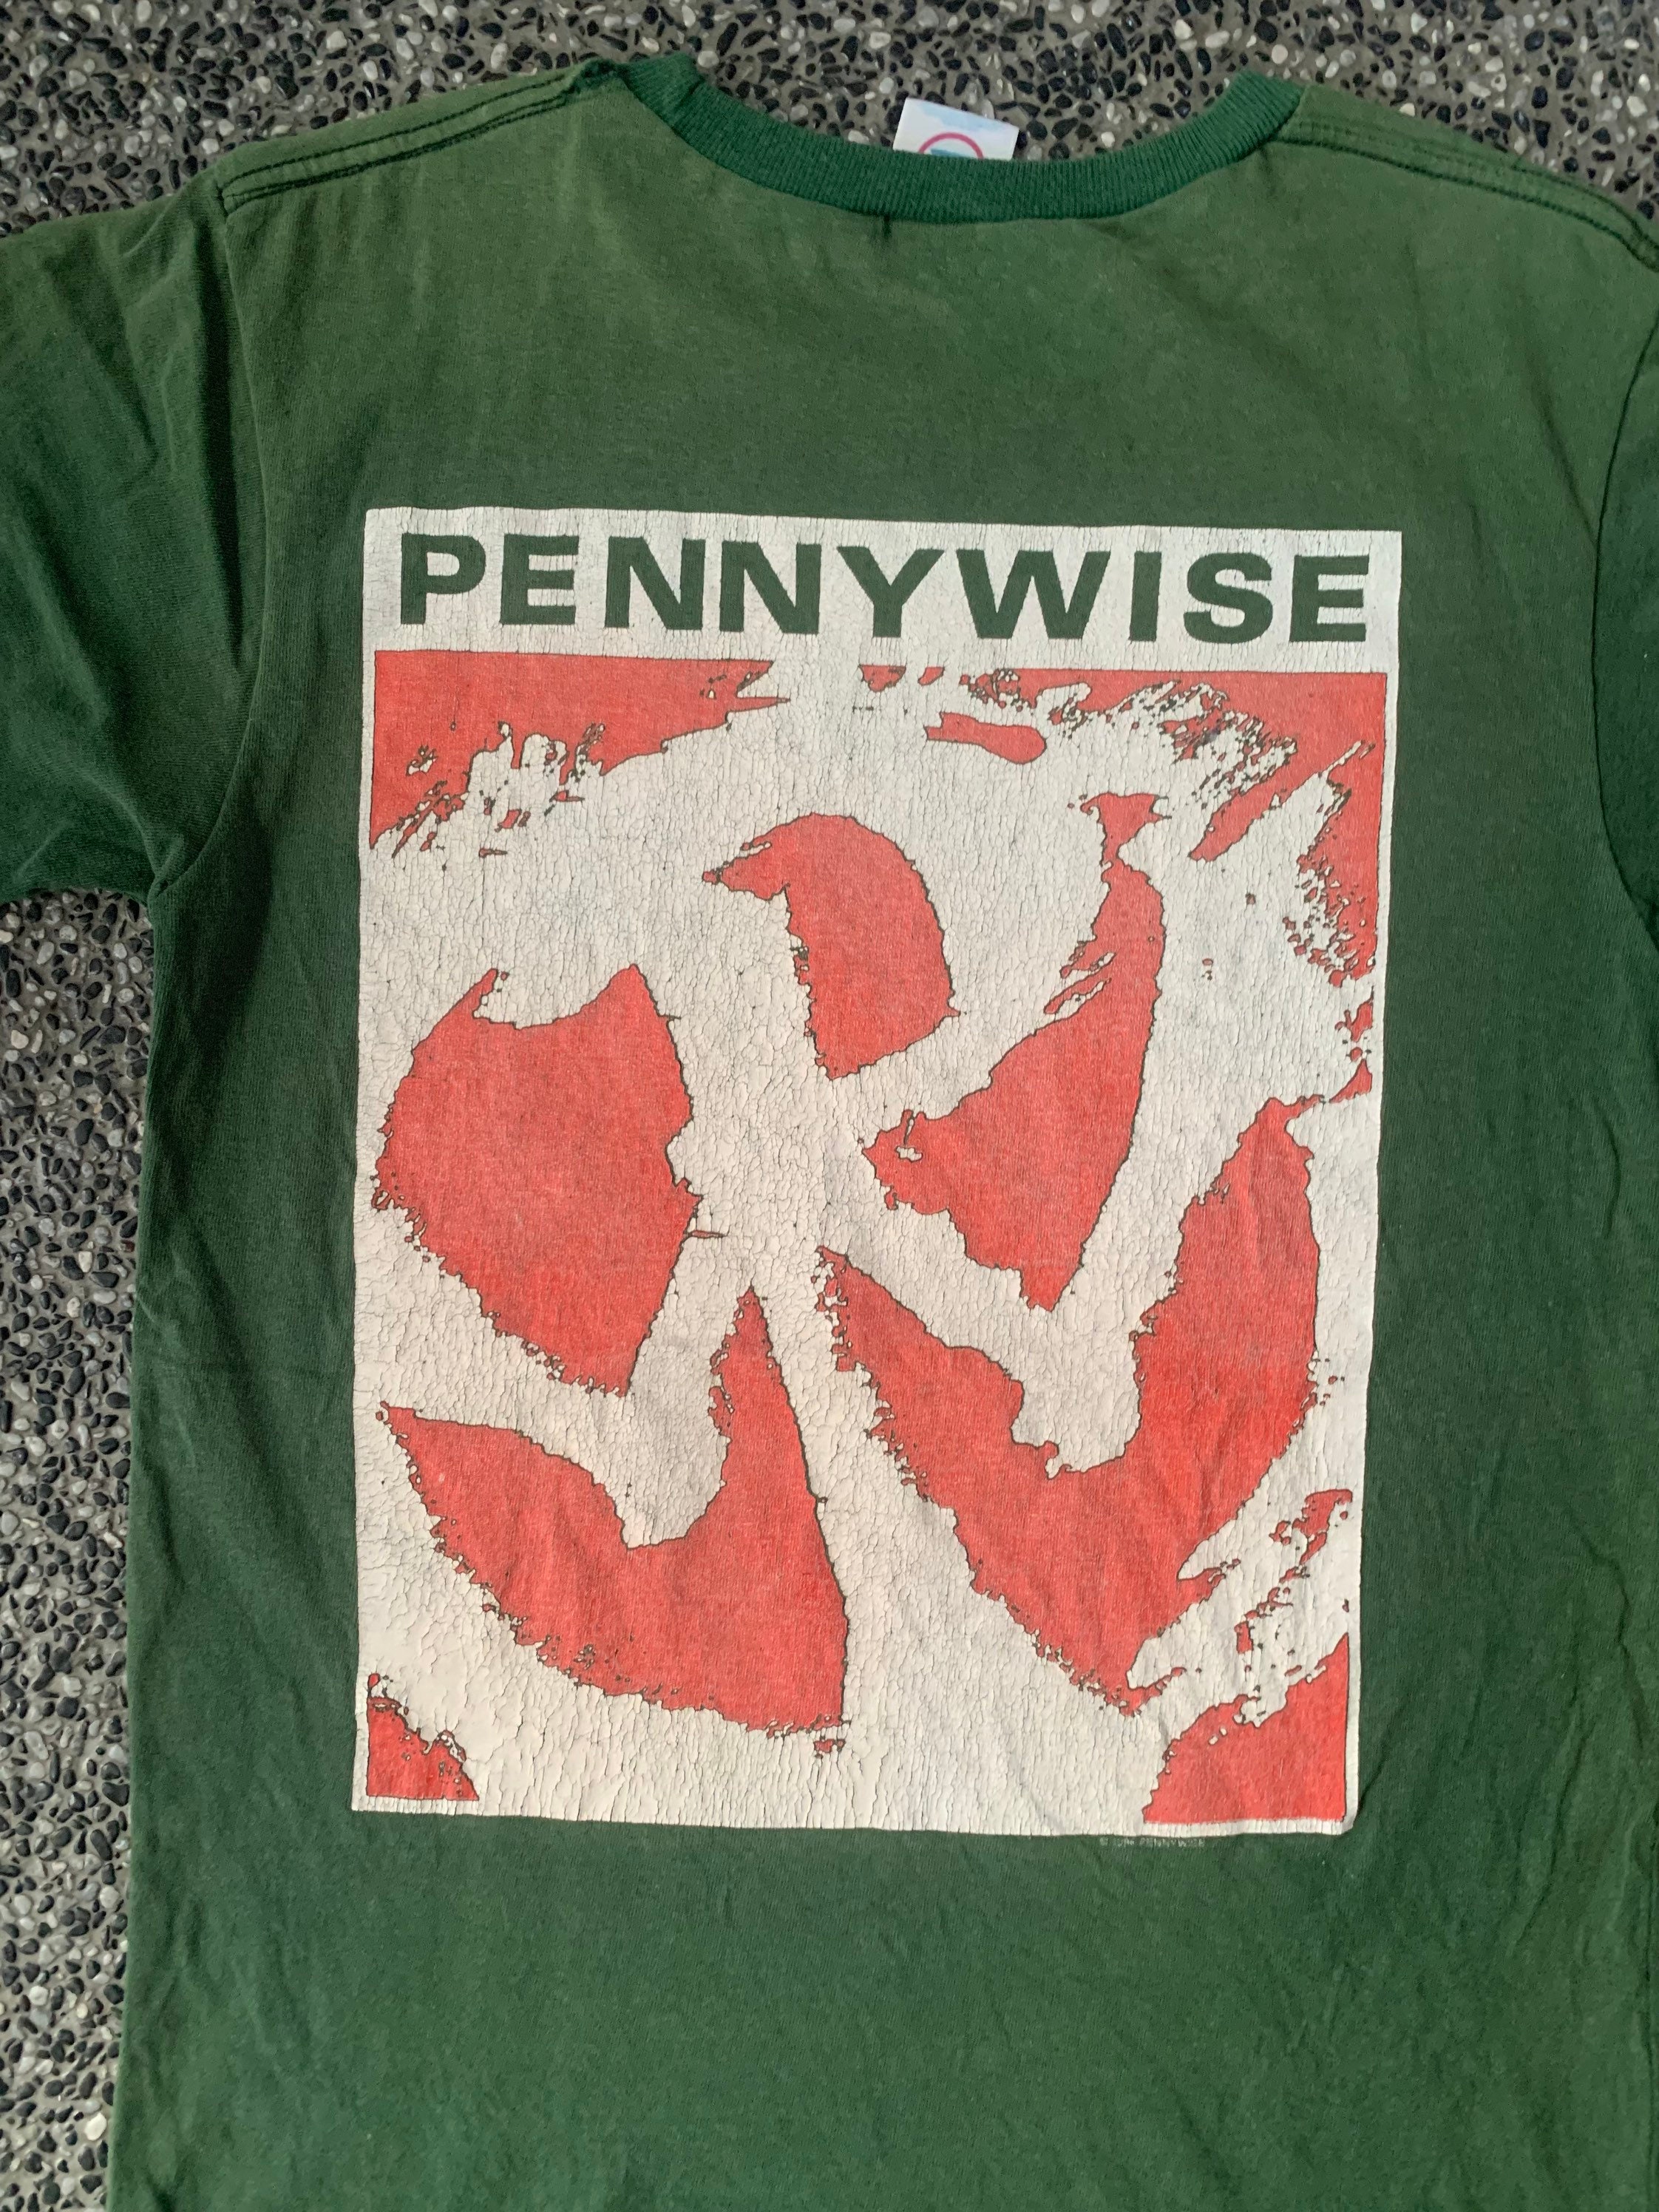 Vintage 90s Pennywise Rock Band T Shirt resize - Etsy Canada